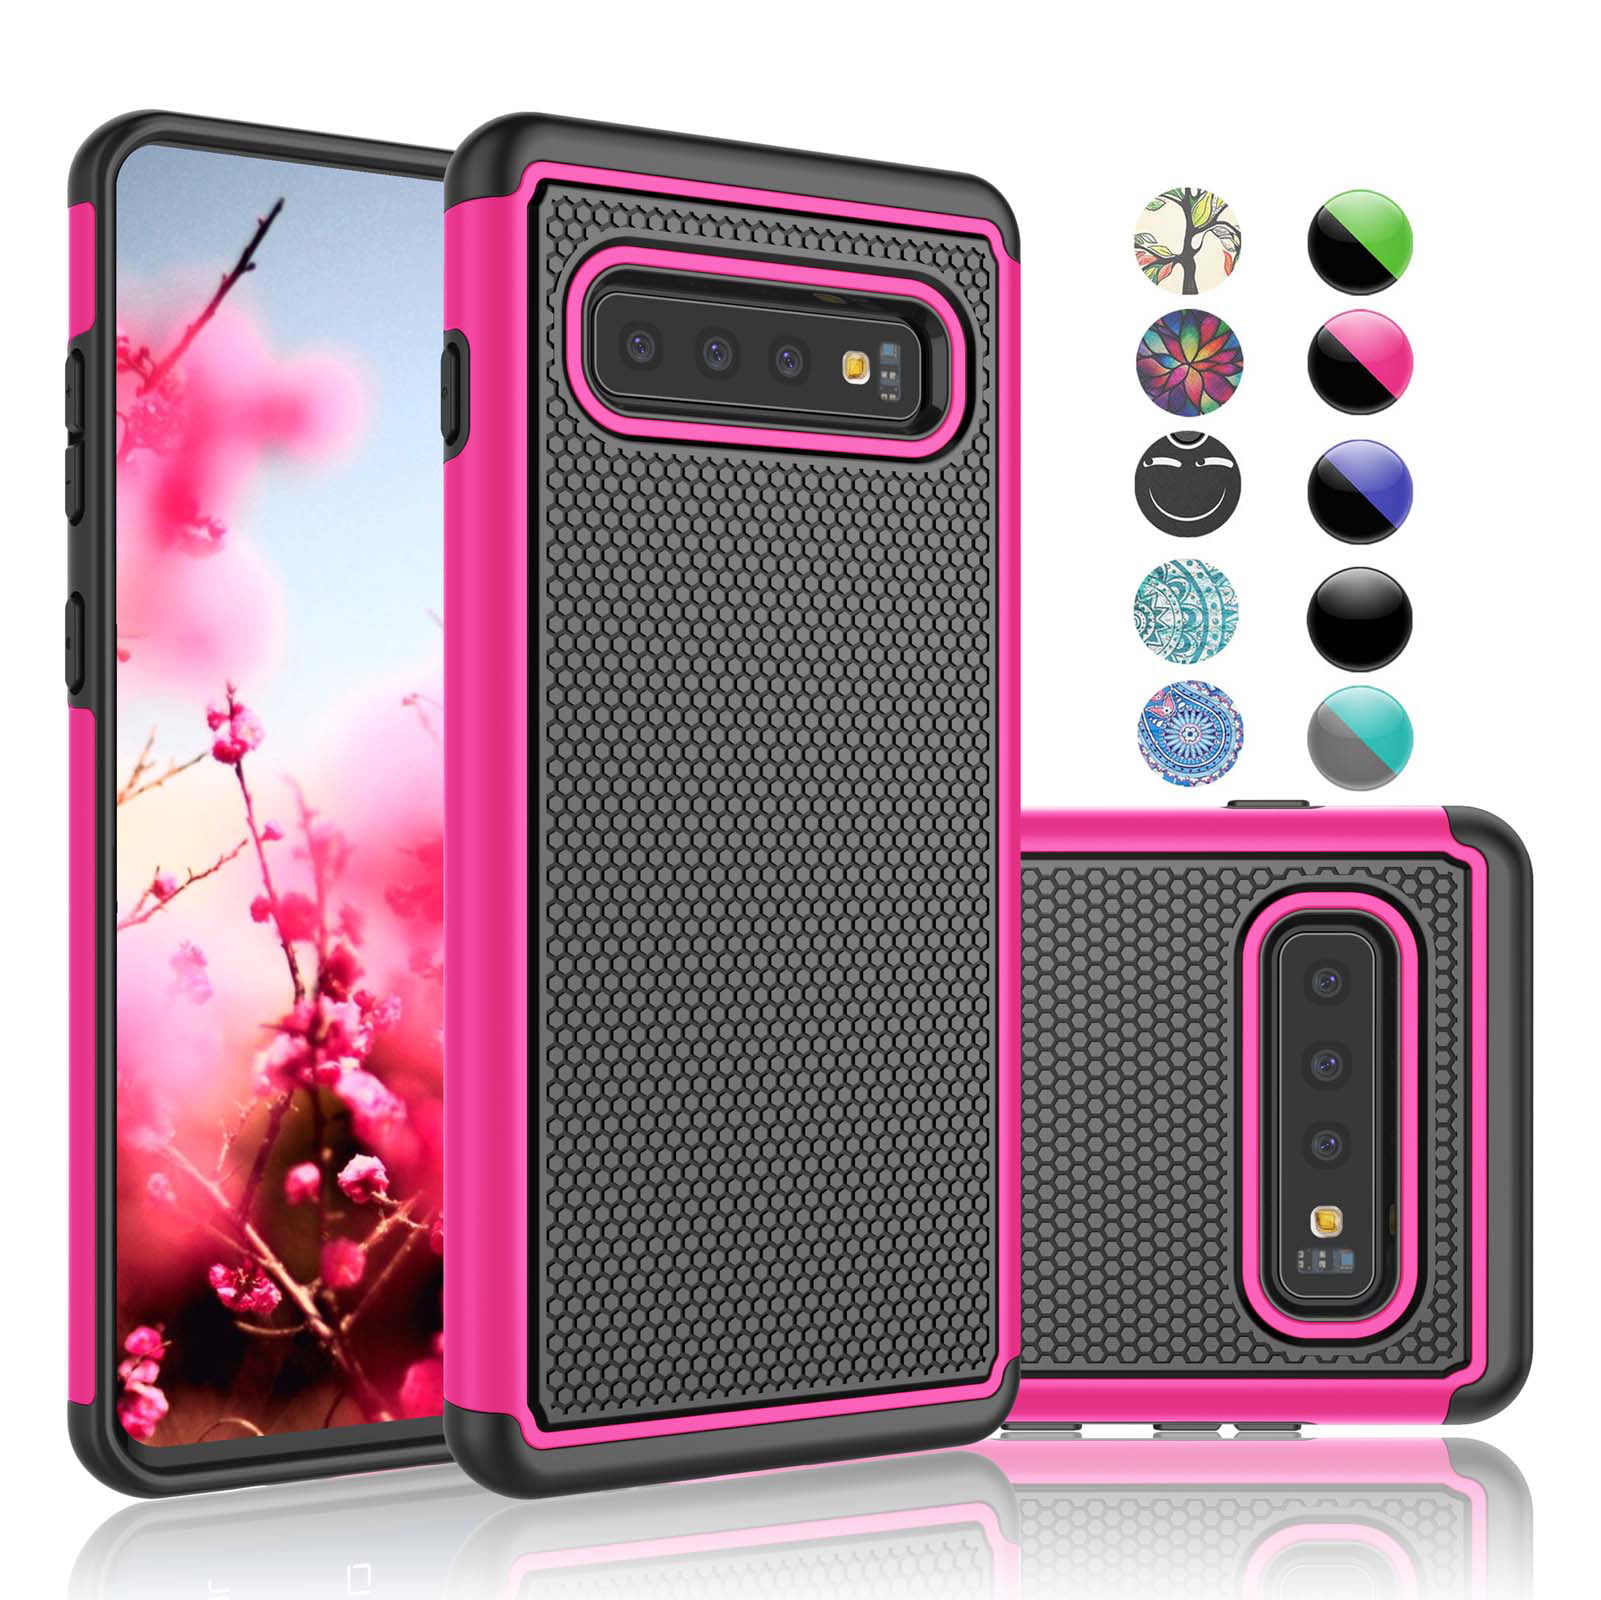 Samsung Galaxy S10 Plus Case, S10 Case, Njjex [Shock Absorption] Dual Hybrid Armor Defender Protective Case Cover for Smamsung Galaxy S10 Plus 6.4" (2019) -Hot Pink -